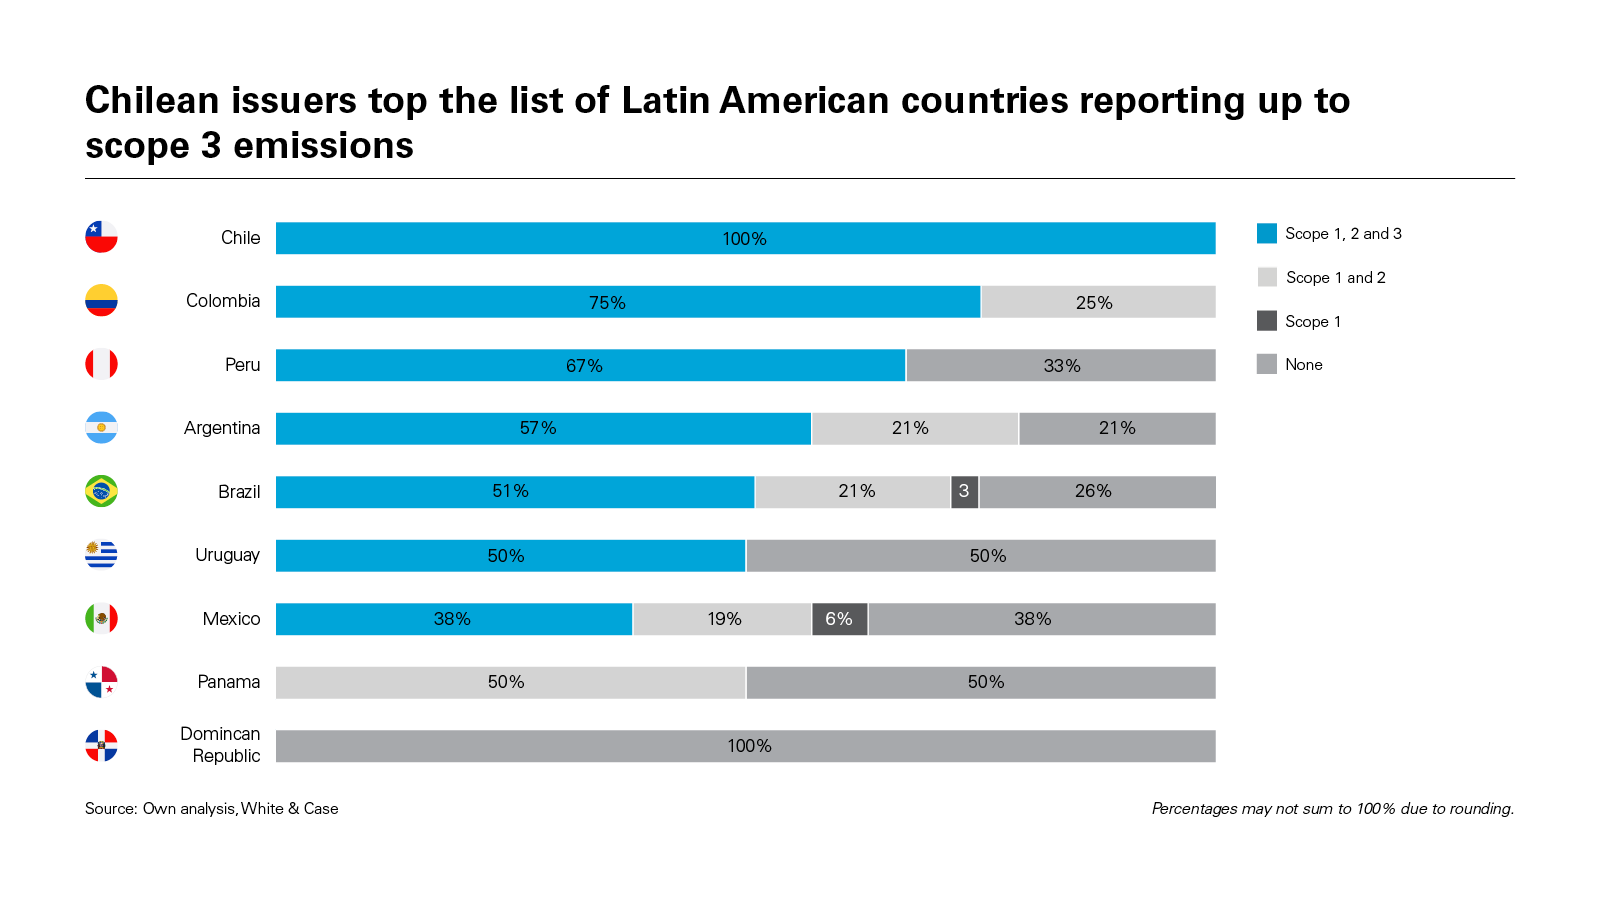 Chilean issuers top the list of Latin American countries reporting up to scope 3 emissions